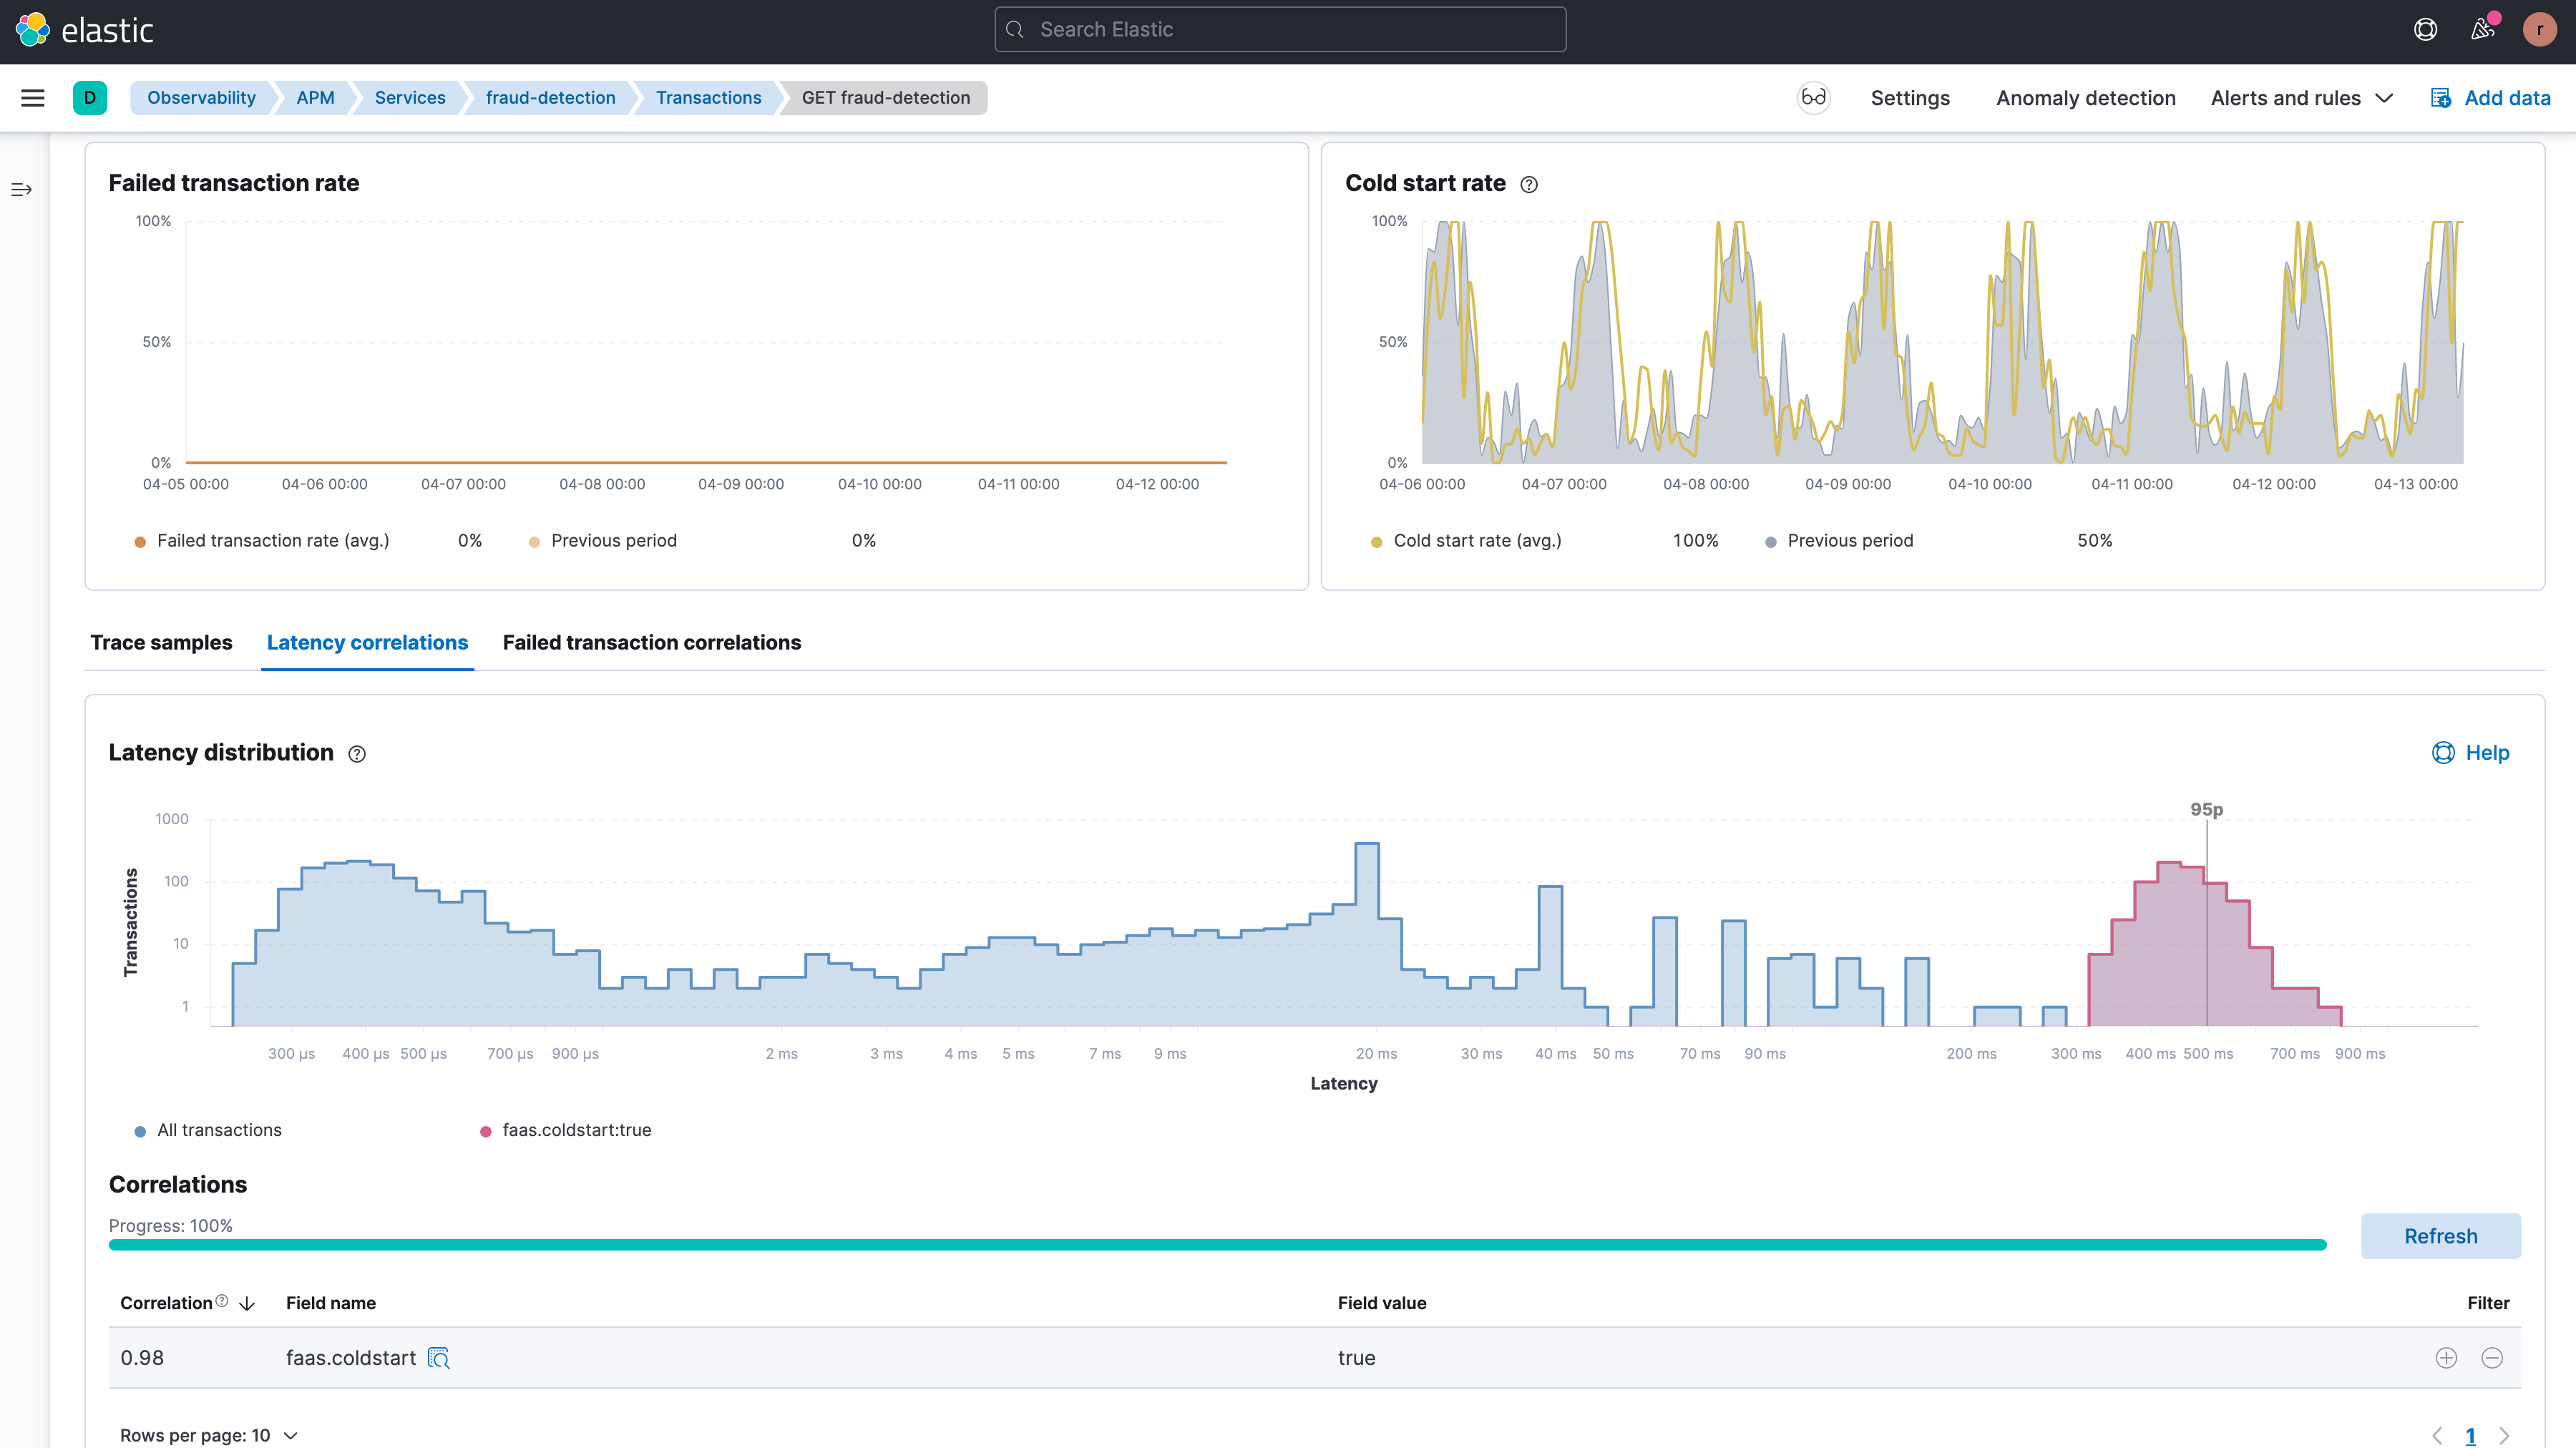 Serverless monitoring dashboards segment and analyze serverless metadata joined with observability data.